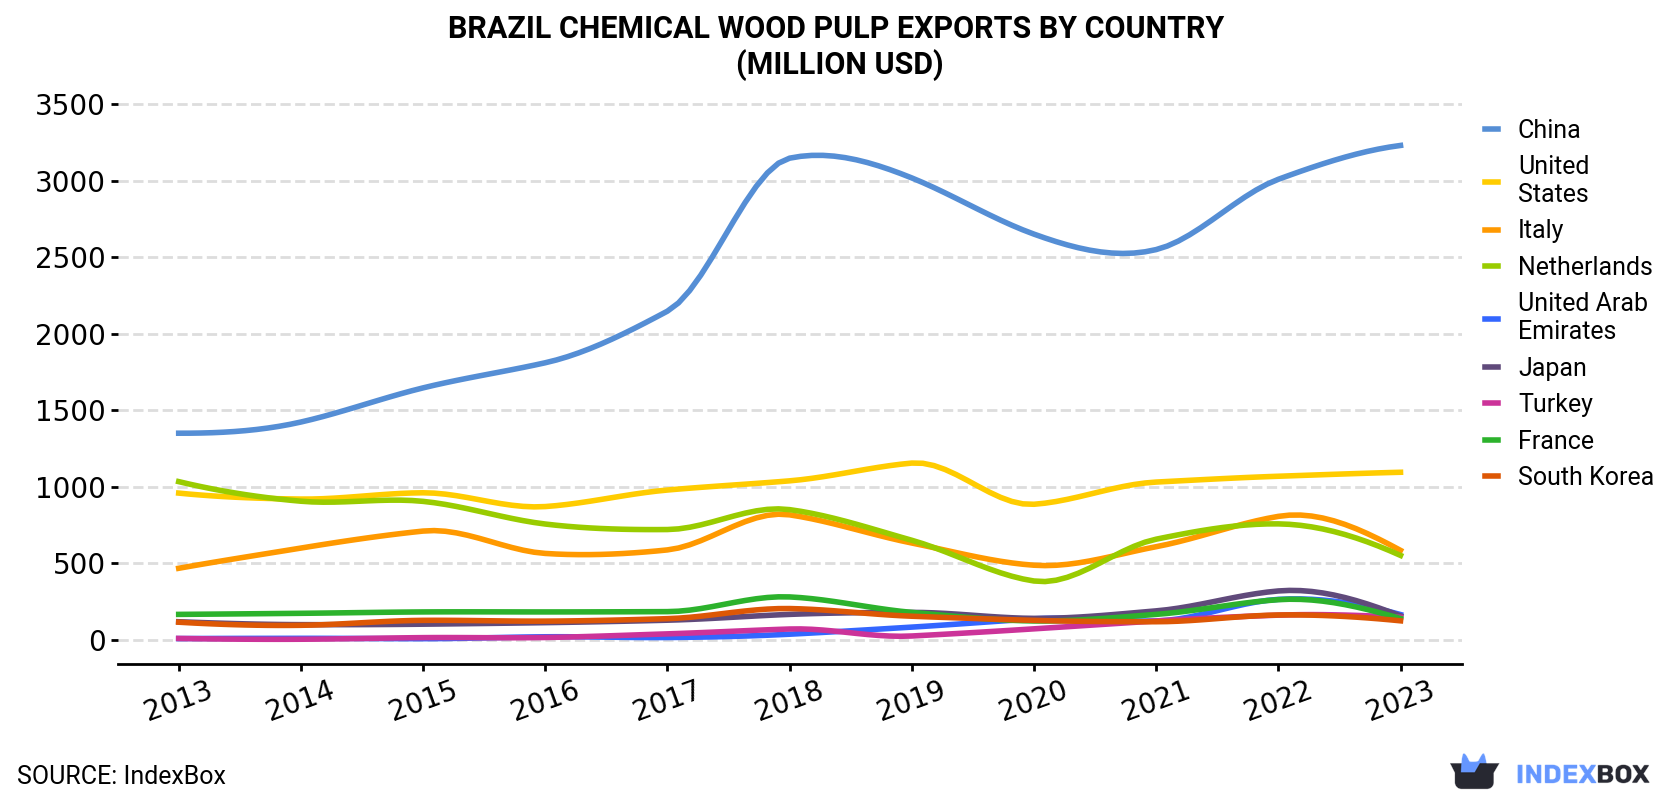 Brazil Chemical Wood Pulp Exports By Country (Million USD)